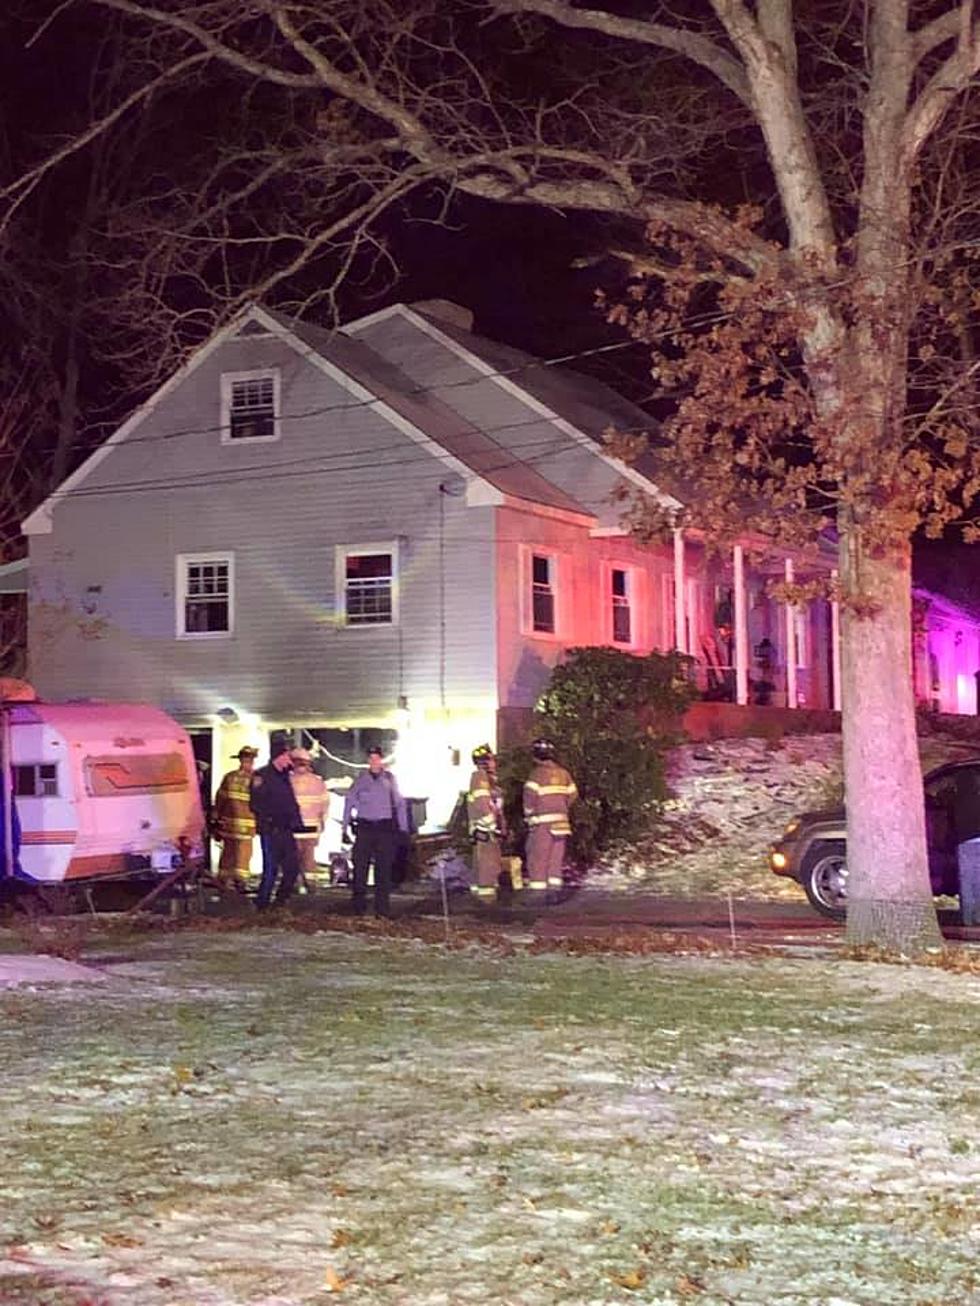 Toms River house fire ruled accidental